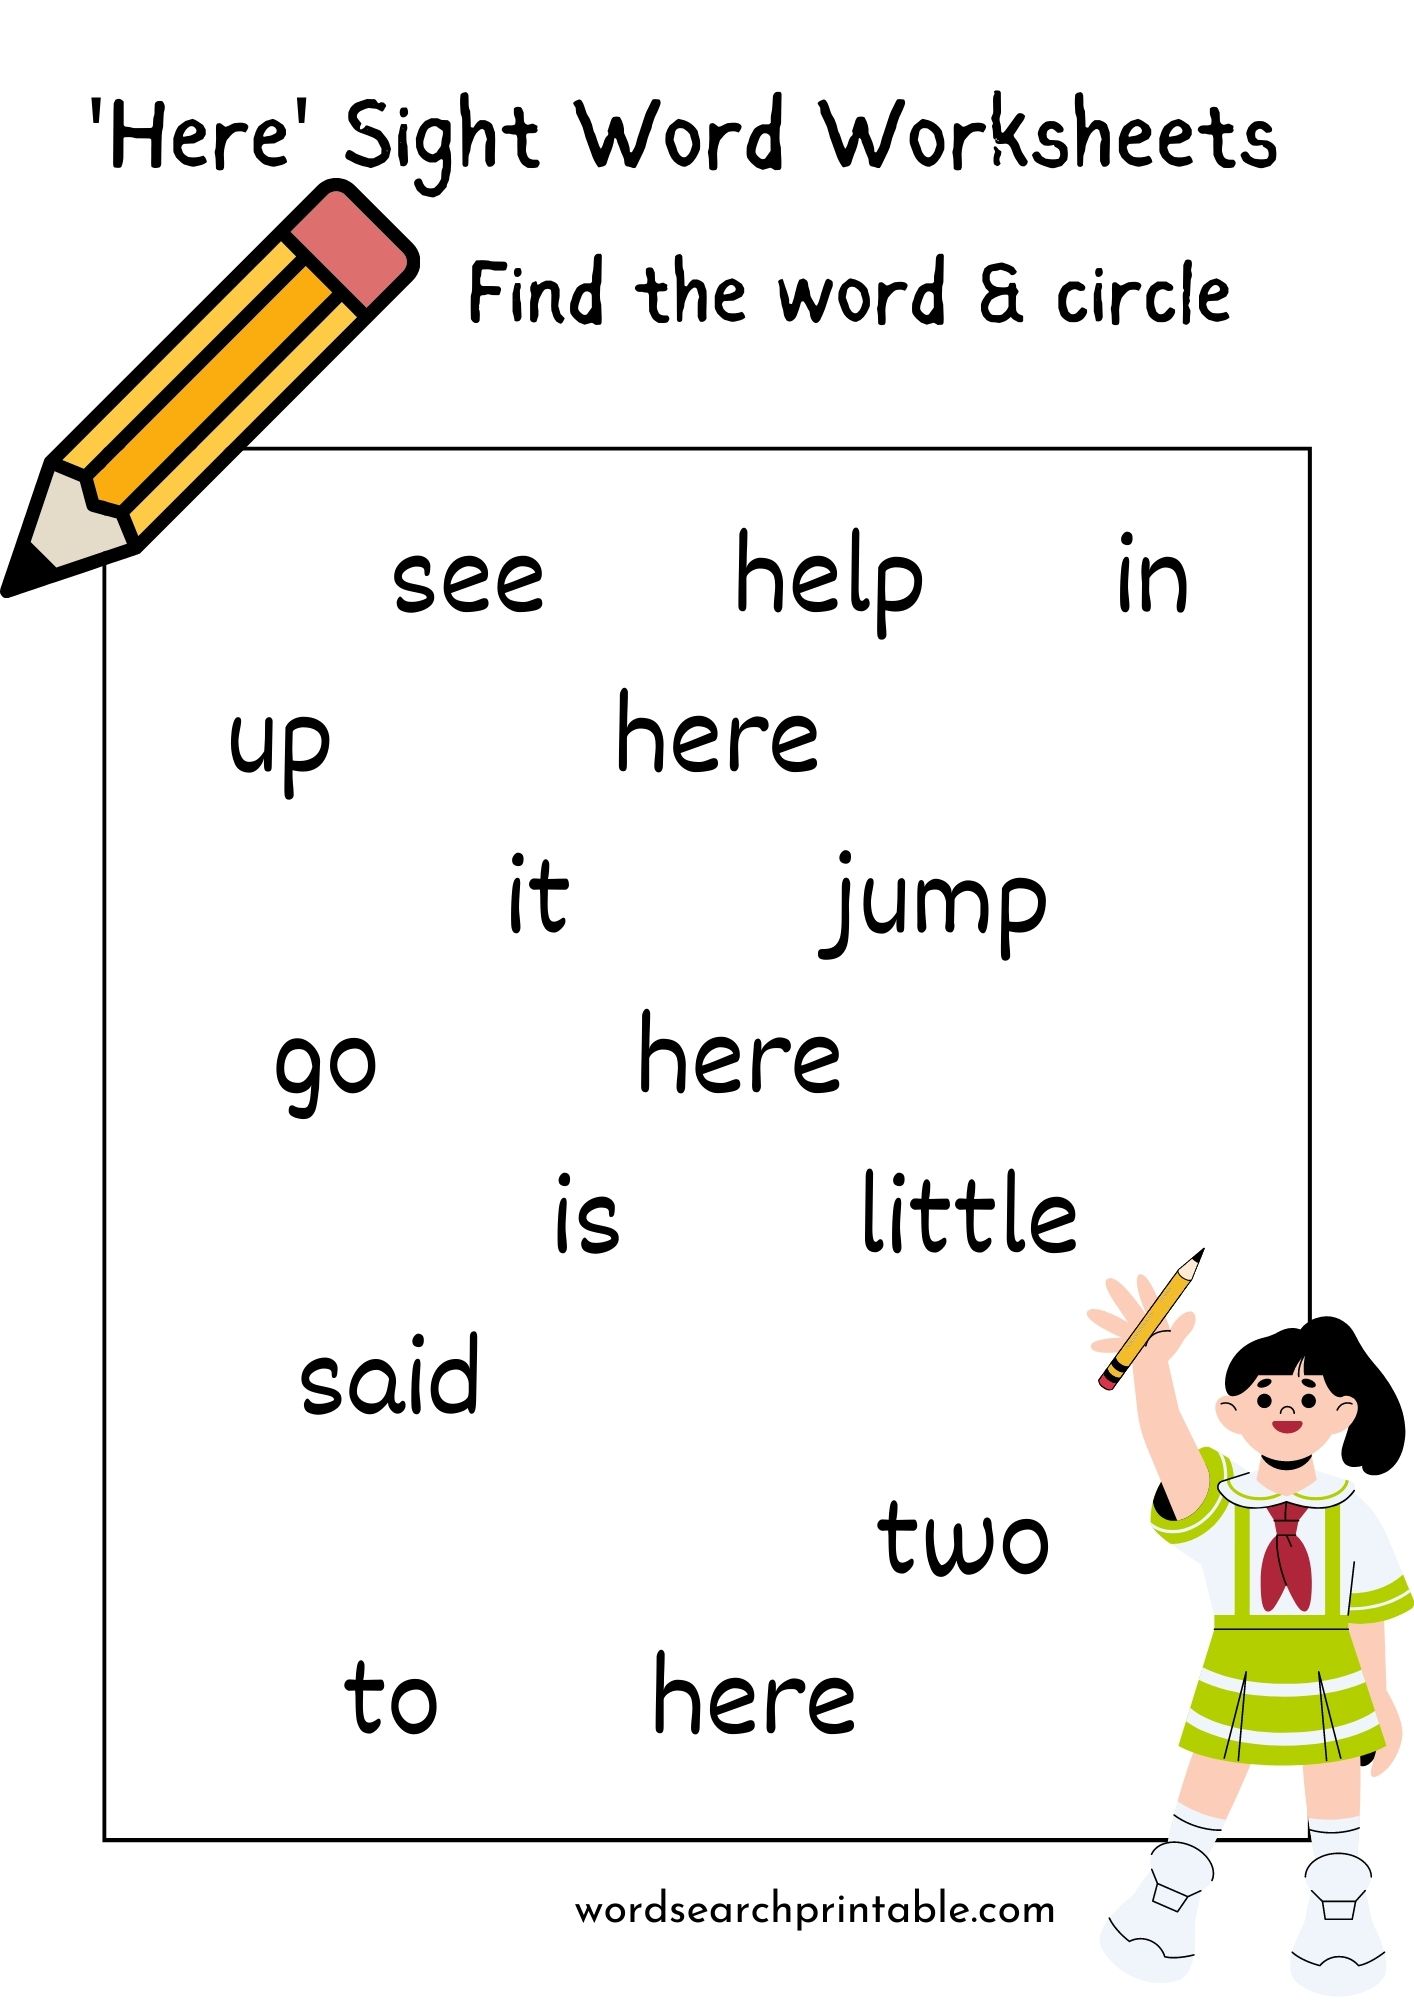 Find the sight word Here and circle it